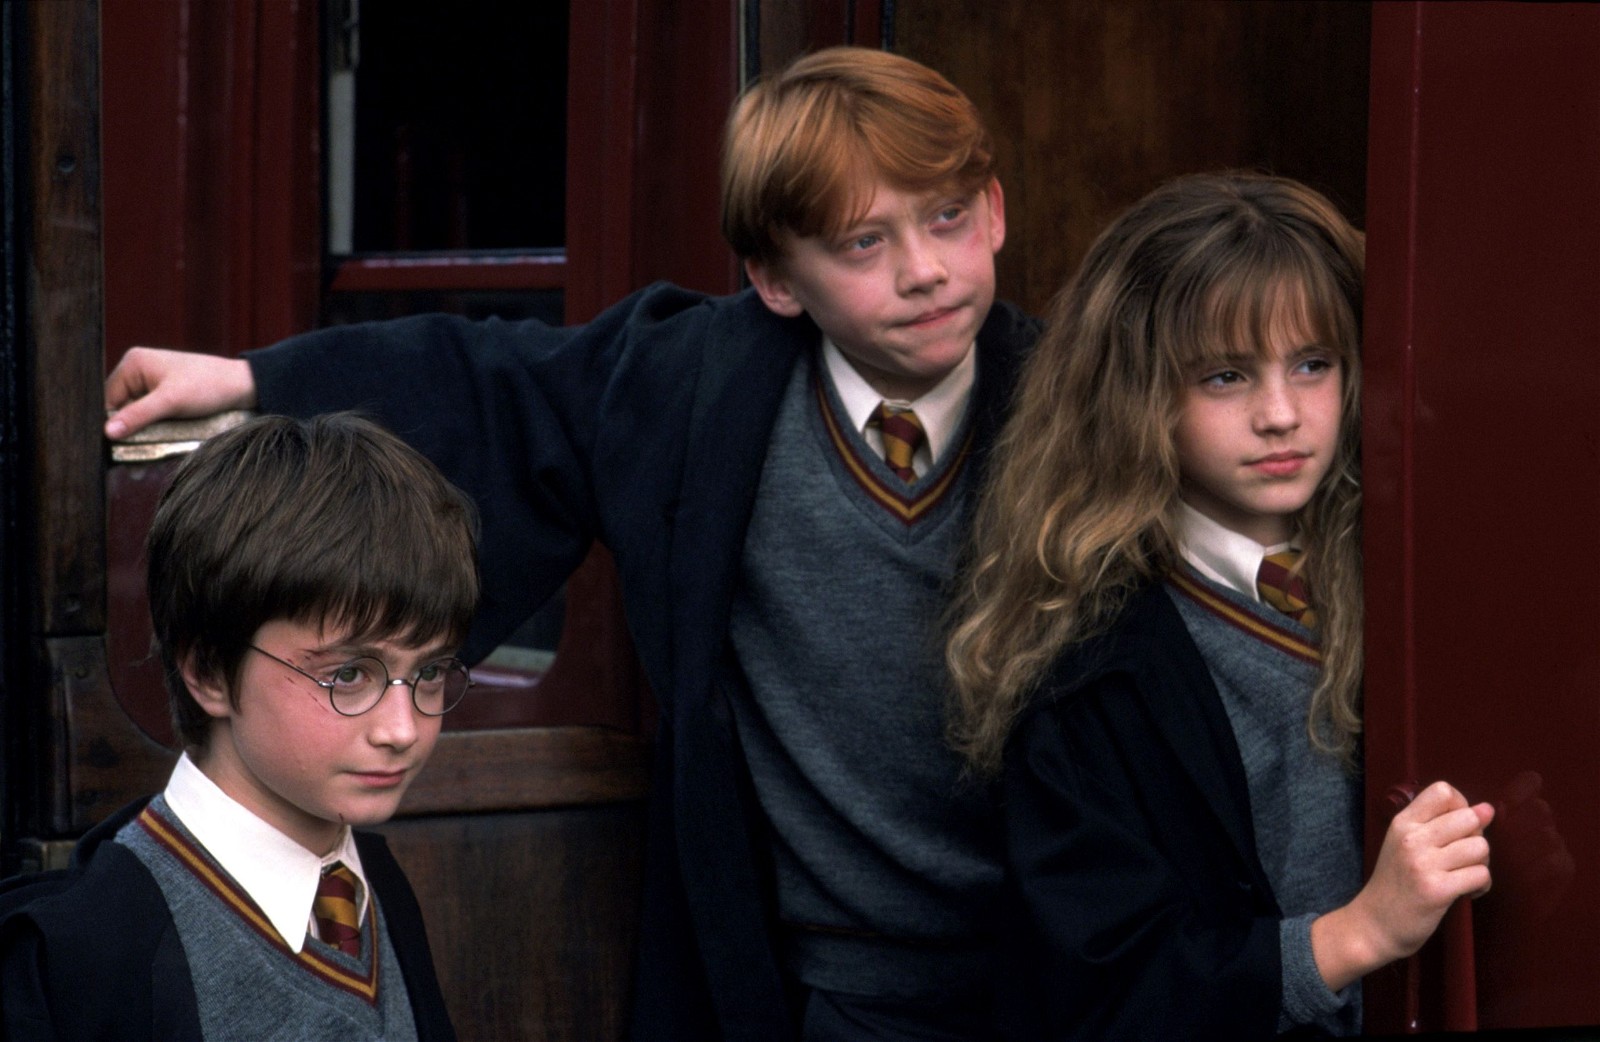 Daniel Radcliffe, Rupert Grint, and Emma Watson in the first film, Harry Potter and the Sorcerer's Stone